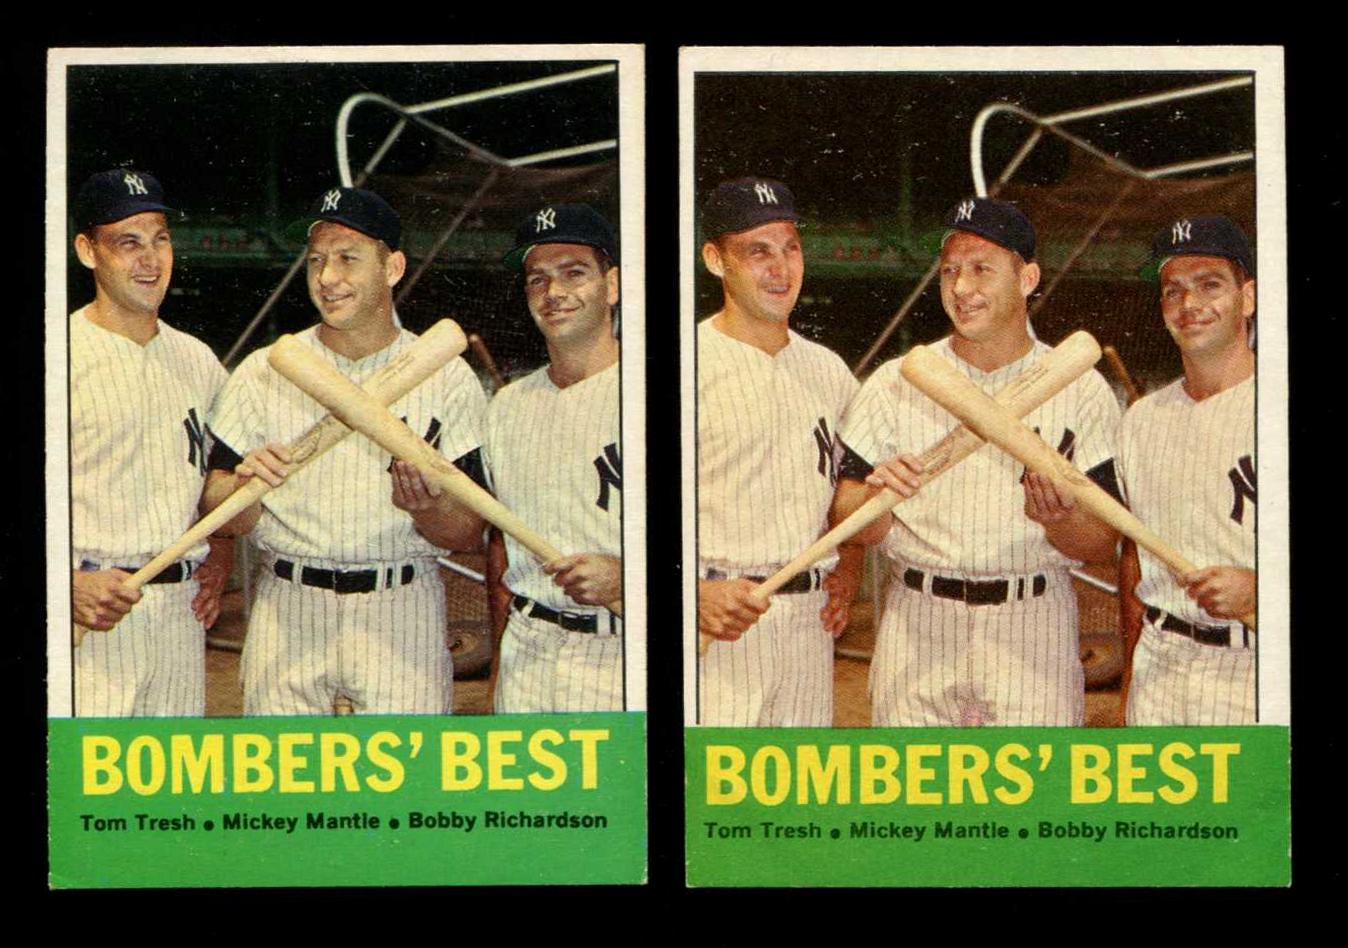 1963 Topps #173 'Bombers' Best' with MICKEY MANTLE (Yankees) Baseball cards value